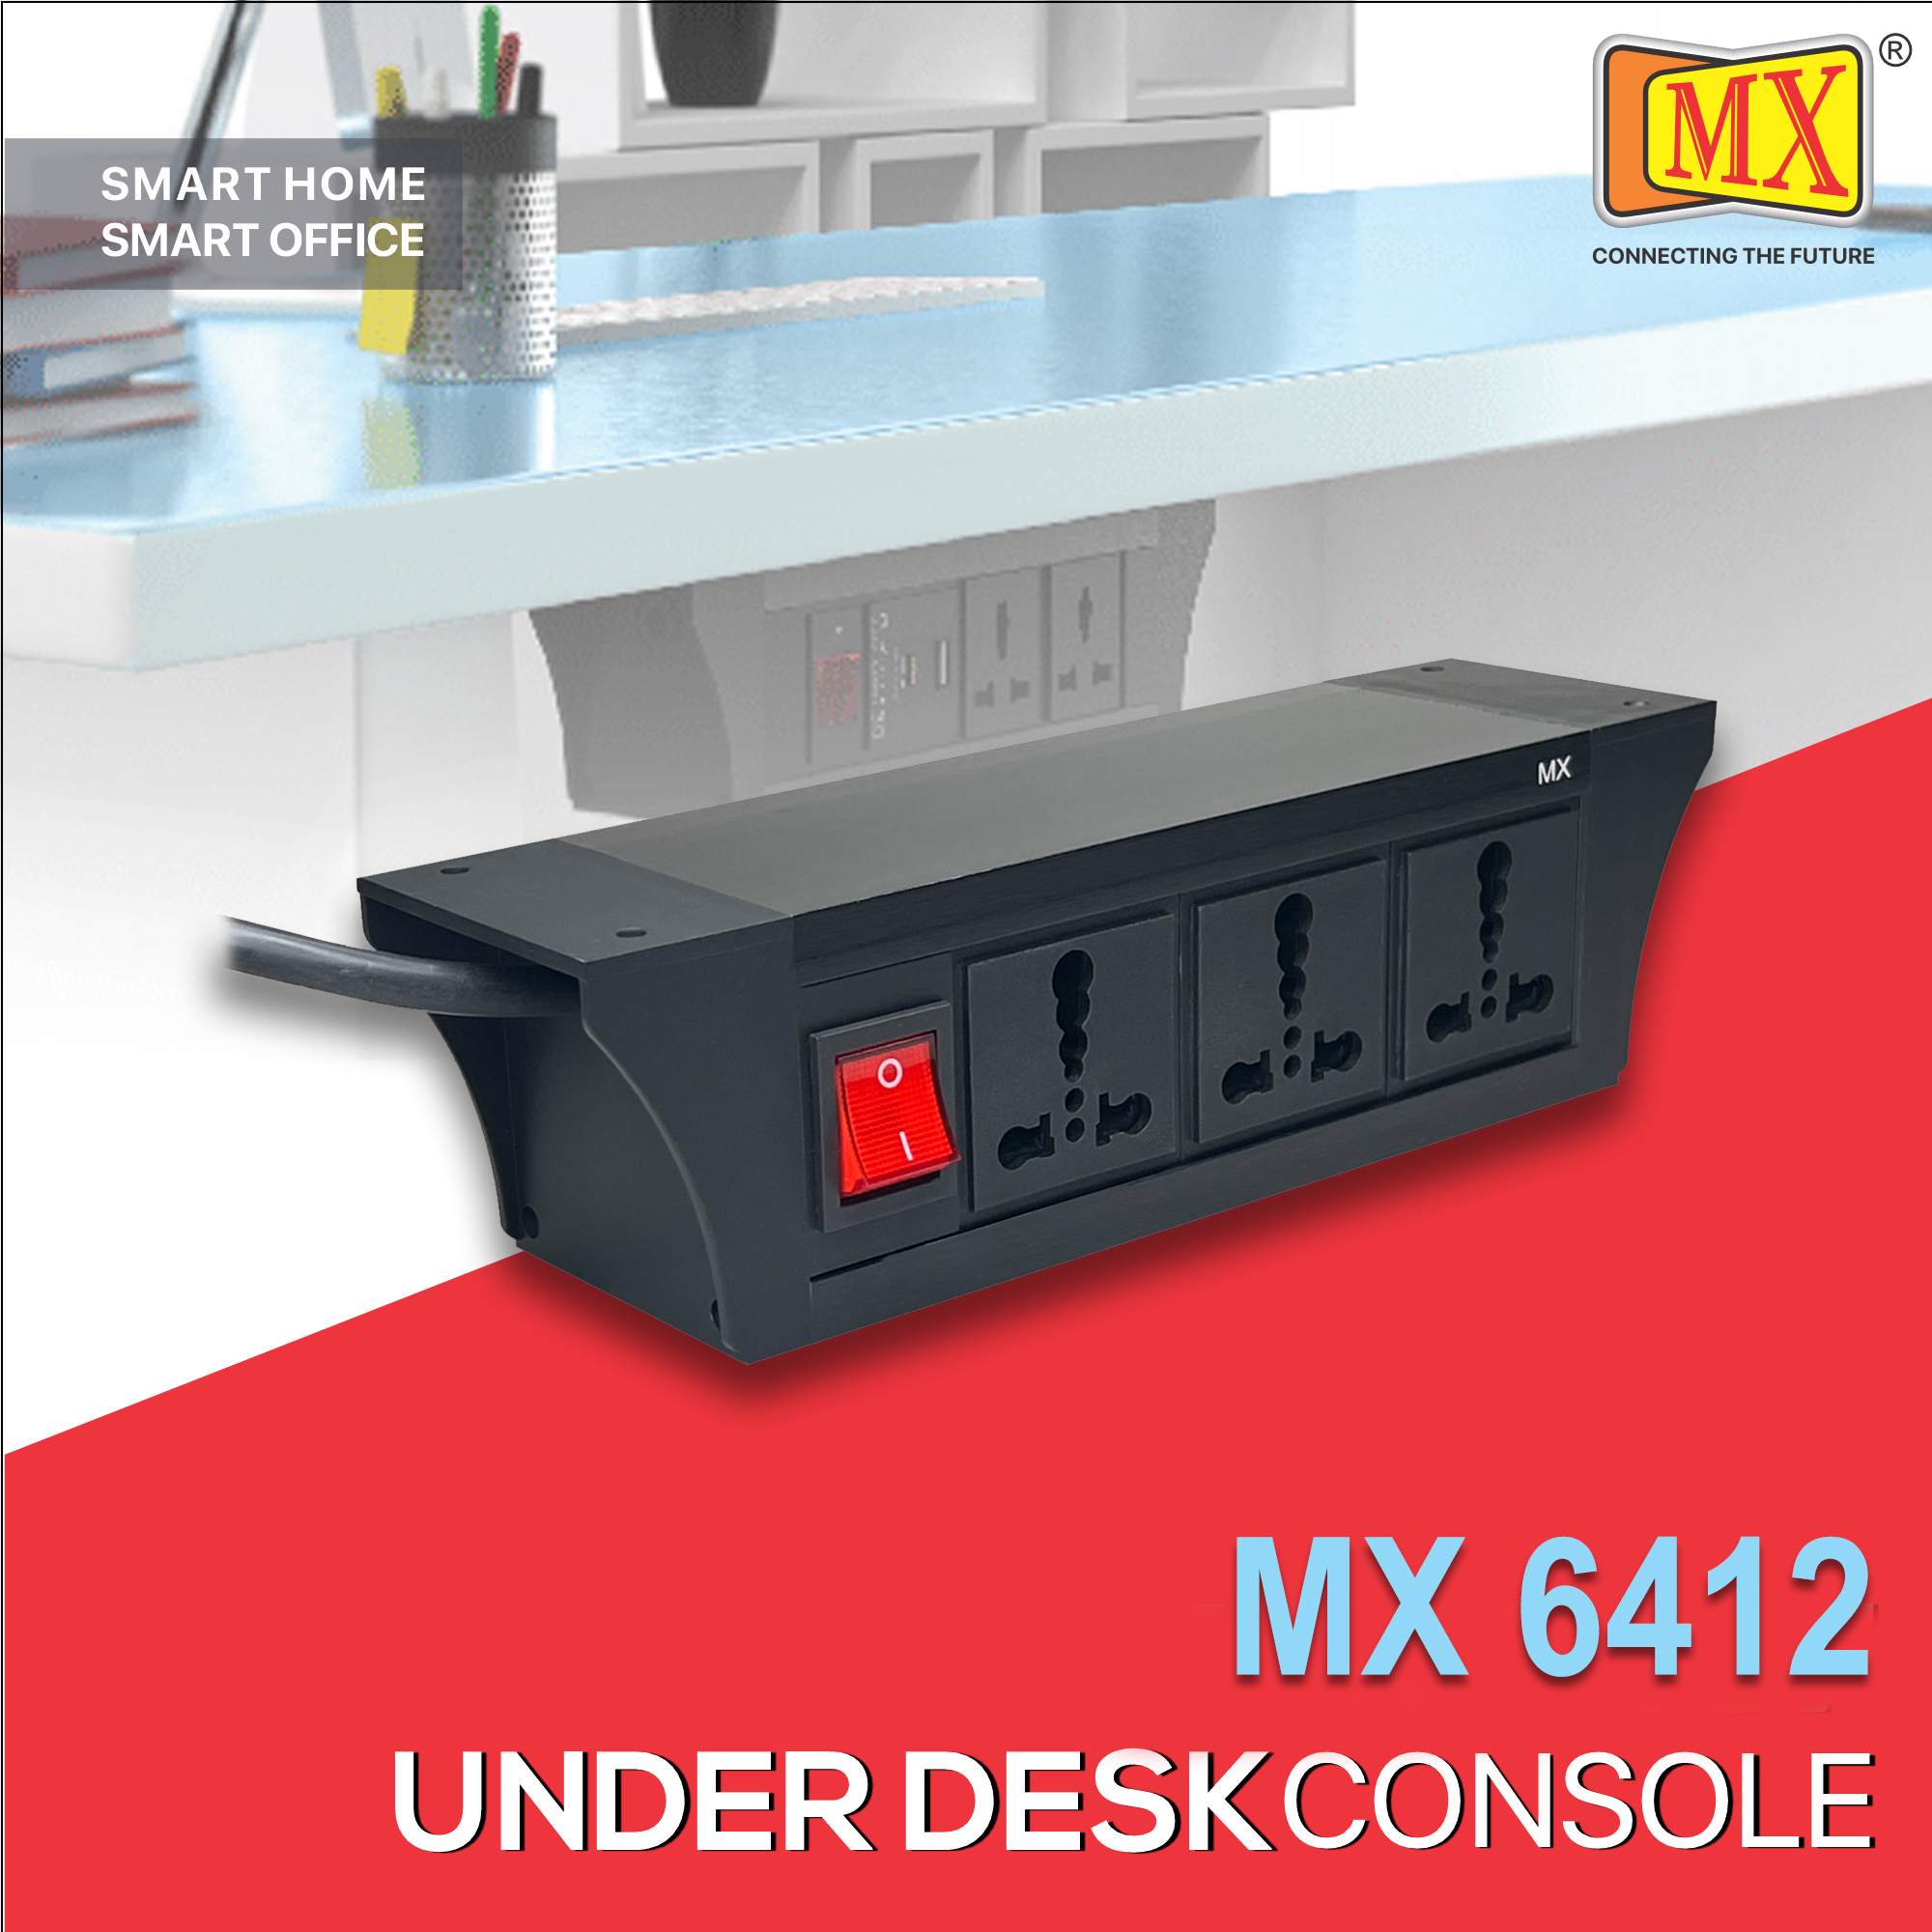 MX PDU Under table 6/16 Amps 3 Universal Socket | 2 USB (2.4 Amp) with Dual Pole LED Indicator Switch | 16 Amps Heavy Duty Cord 1.5 Meter with ISI Marked, Aluminium Body Material(MX 6412-1.5M Black)